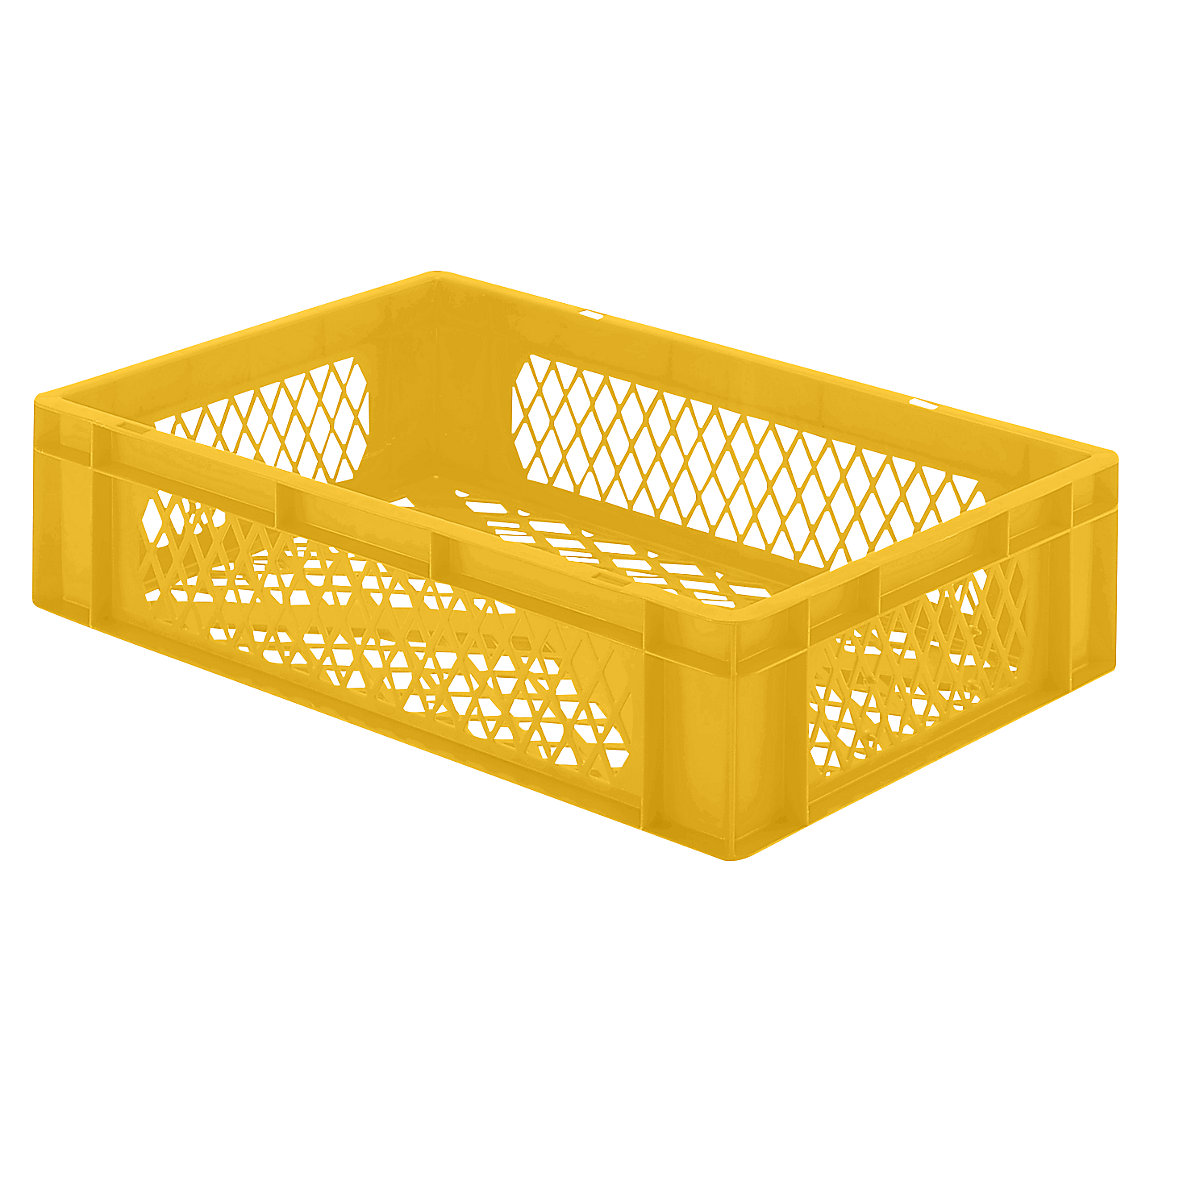 Euro stacking container, perforated walls and base, LxWxH 600 x 400 x 145 mm, yellow, pack of 5